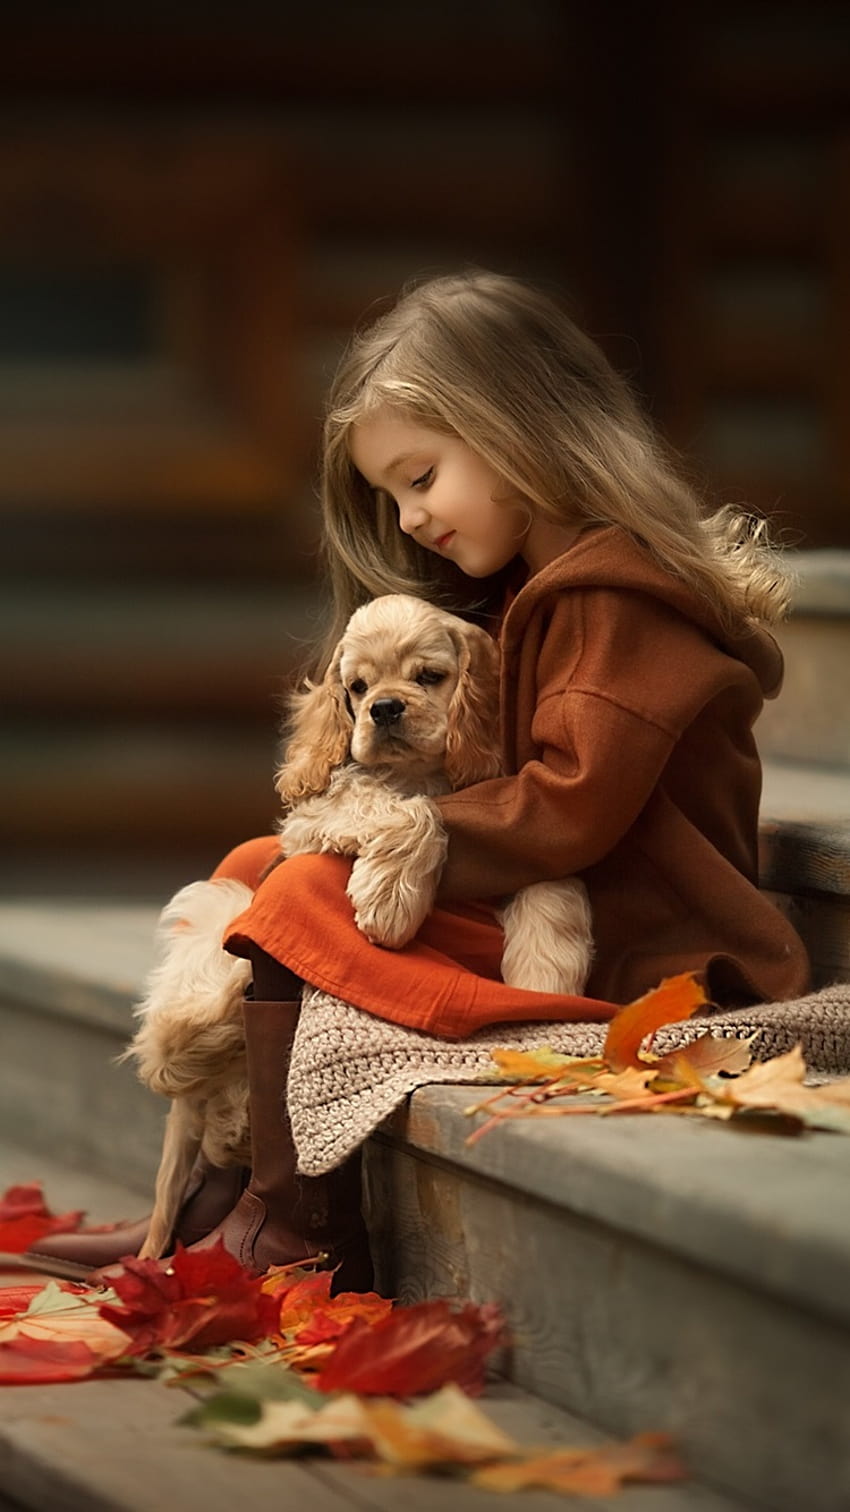 Cute little girl and dog, friends, ladders 2560x1600 , dog and girl HD phone wallpaper